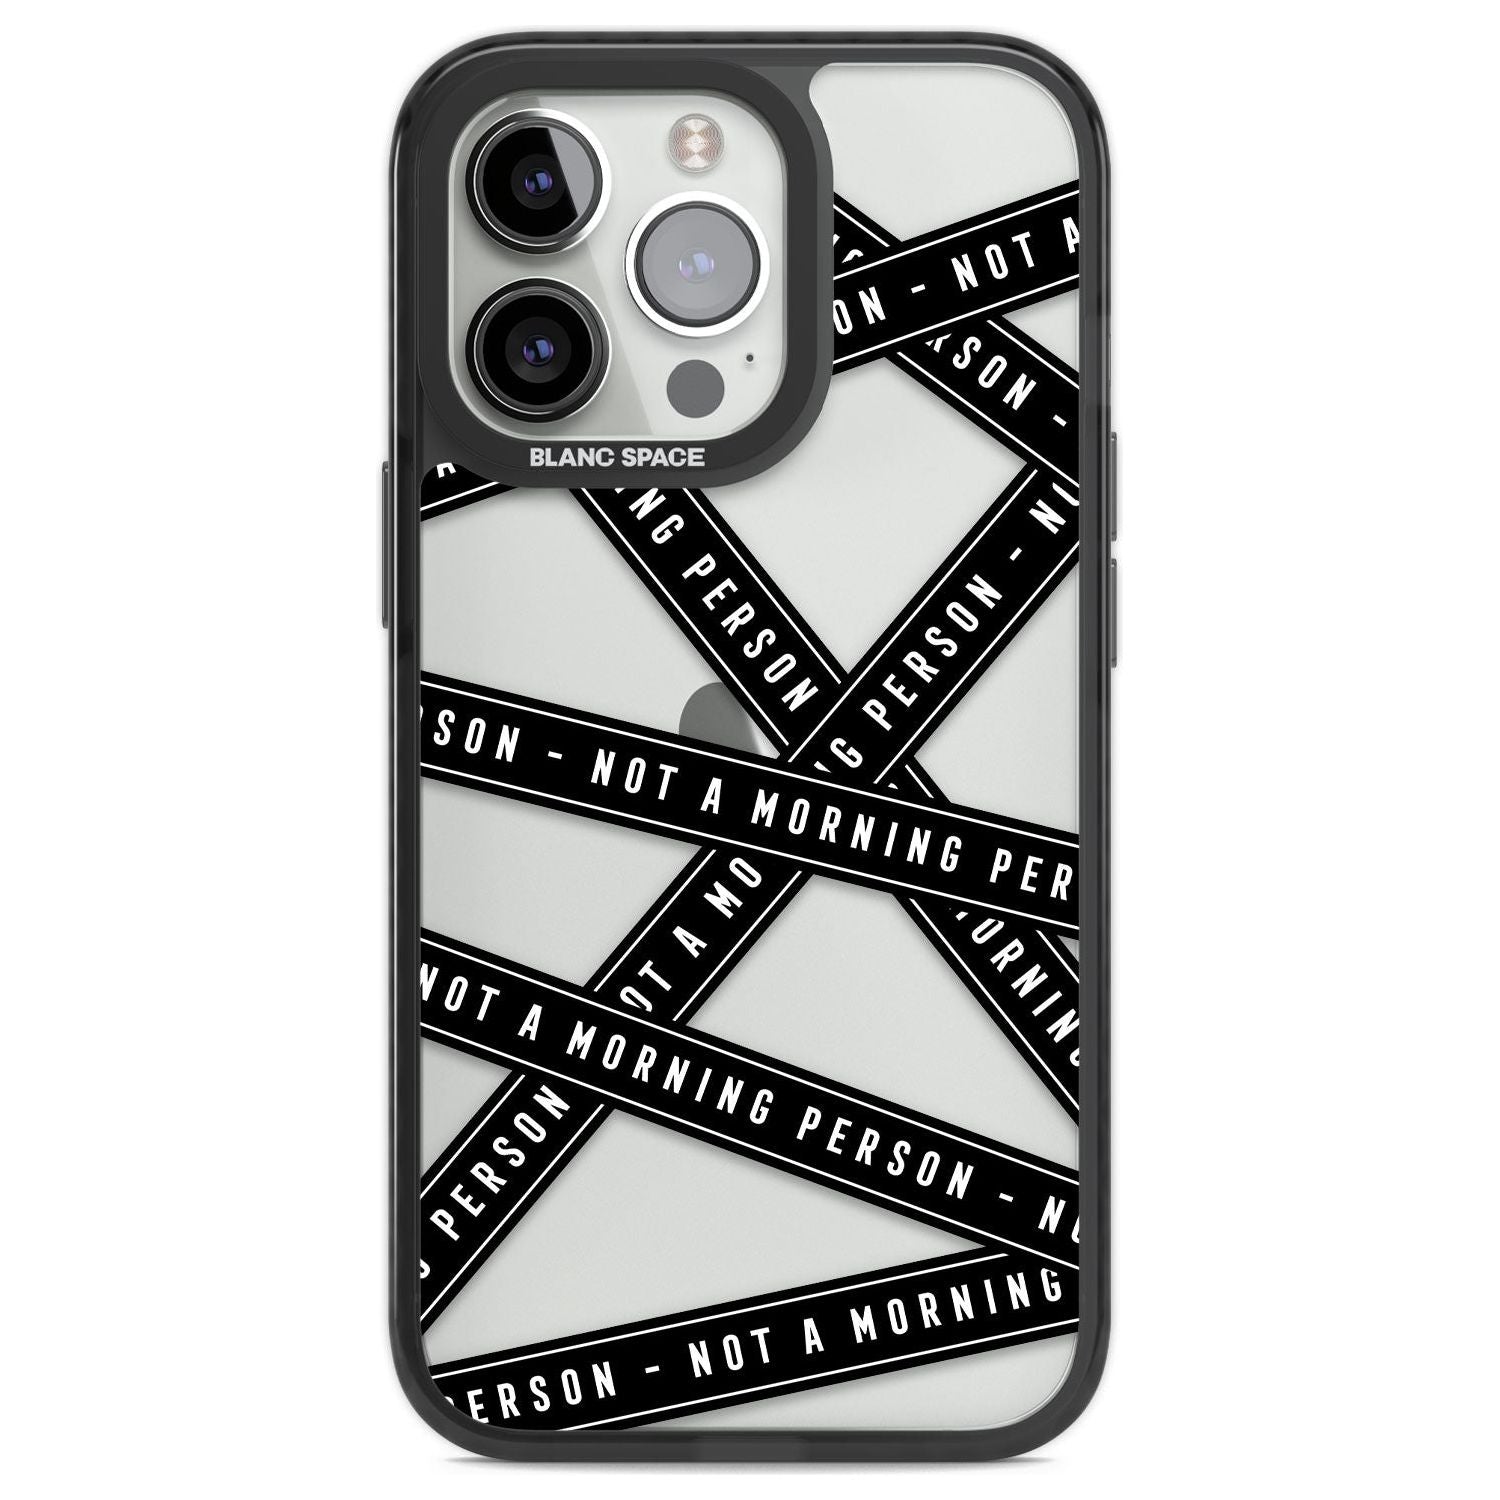 Caution Tape (Clear) Not a Morning Person Phone Case iPhone 13 Pro / Black Impact Case,iPhone 14 Pro / Black Impact Case,iPhone 15 Pro Max / Black Impact Case,iPhone 15 Pro / Black Impact Case Blanc Space